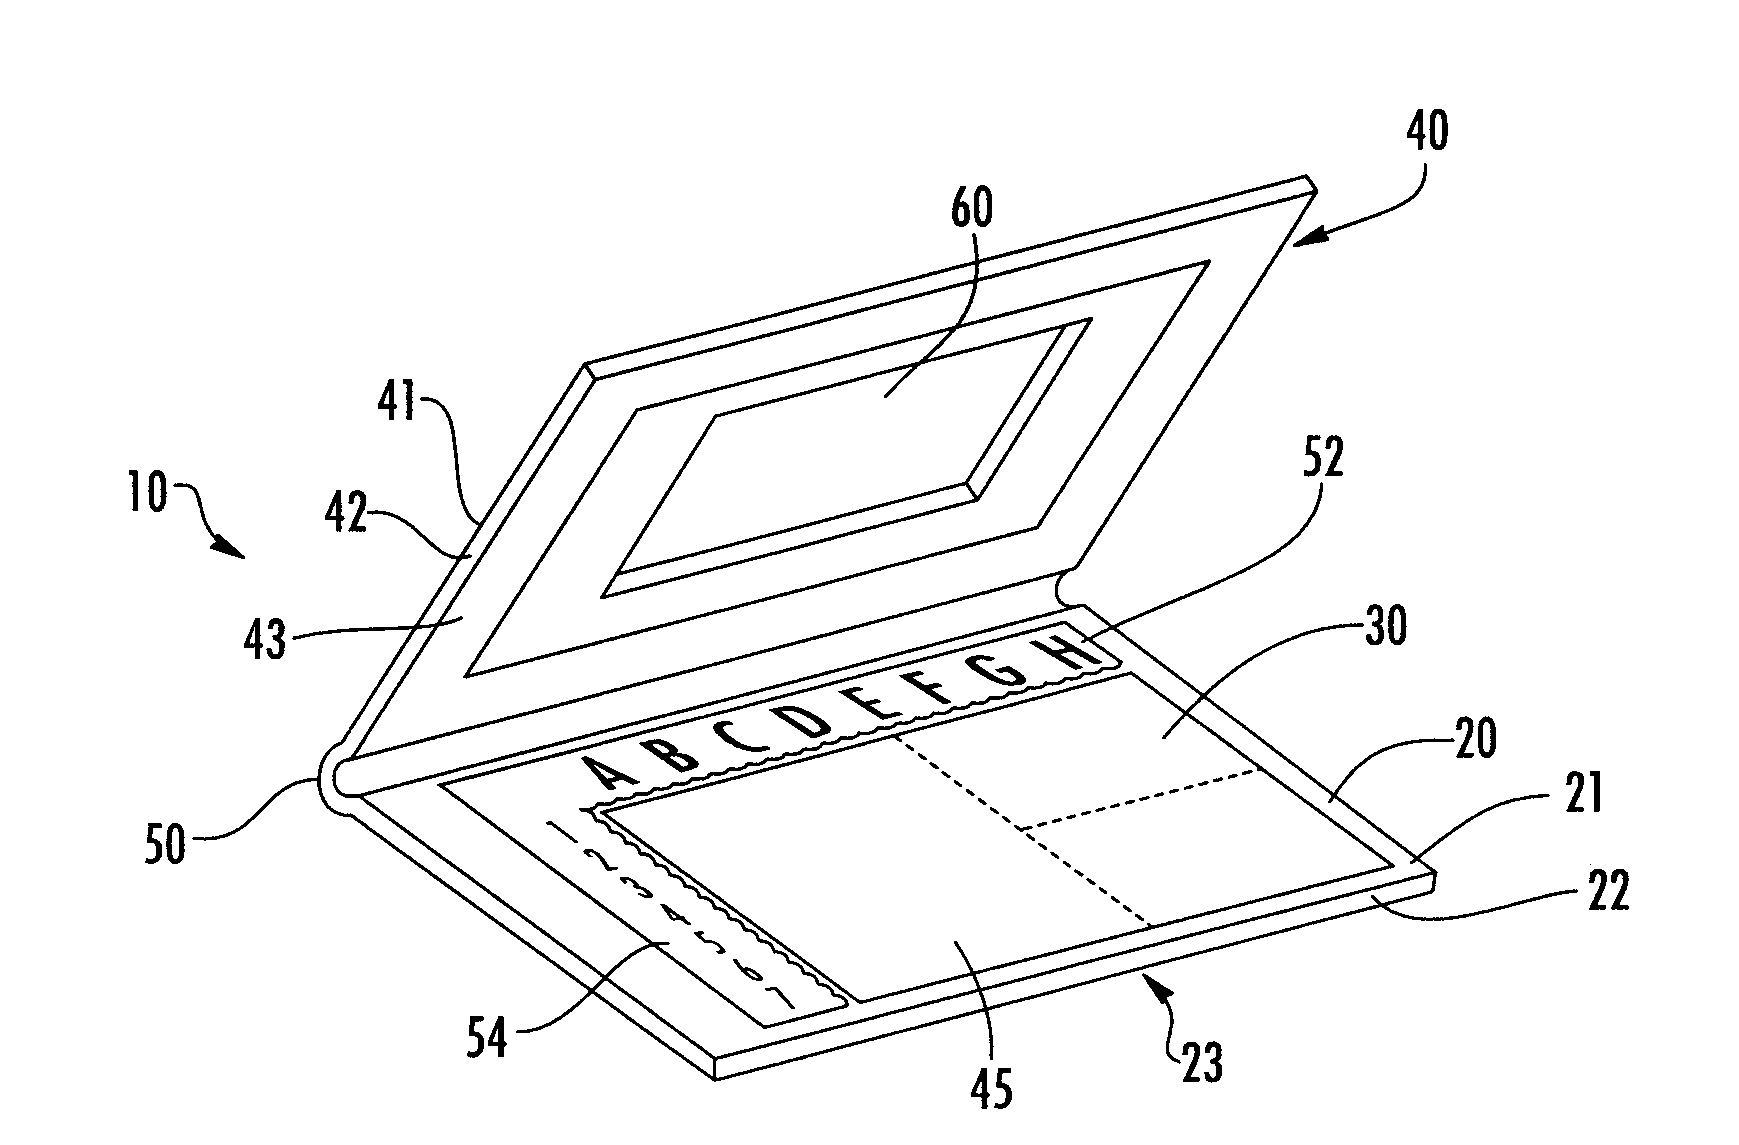 Useful specimen transport apparatus with integral capability to allow three dimensional x-ray images